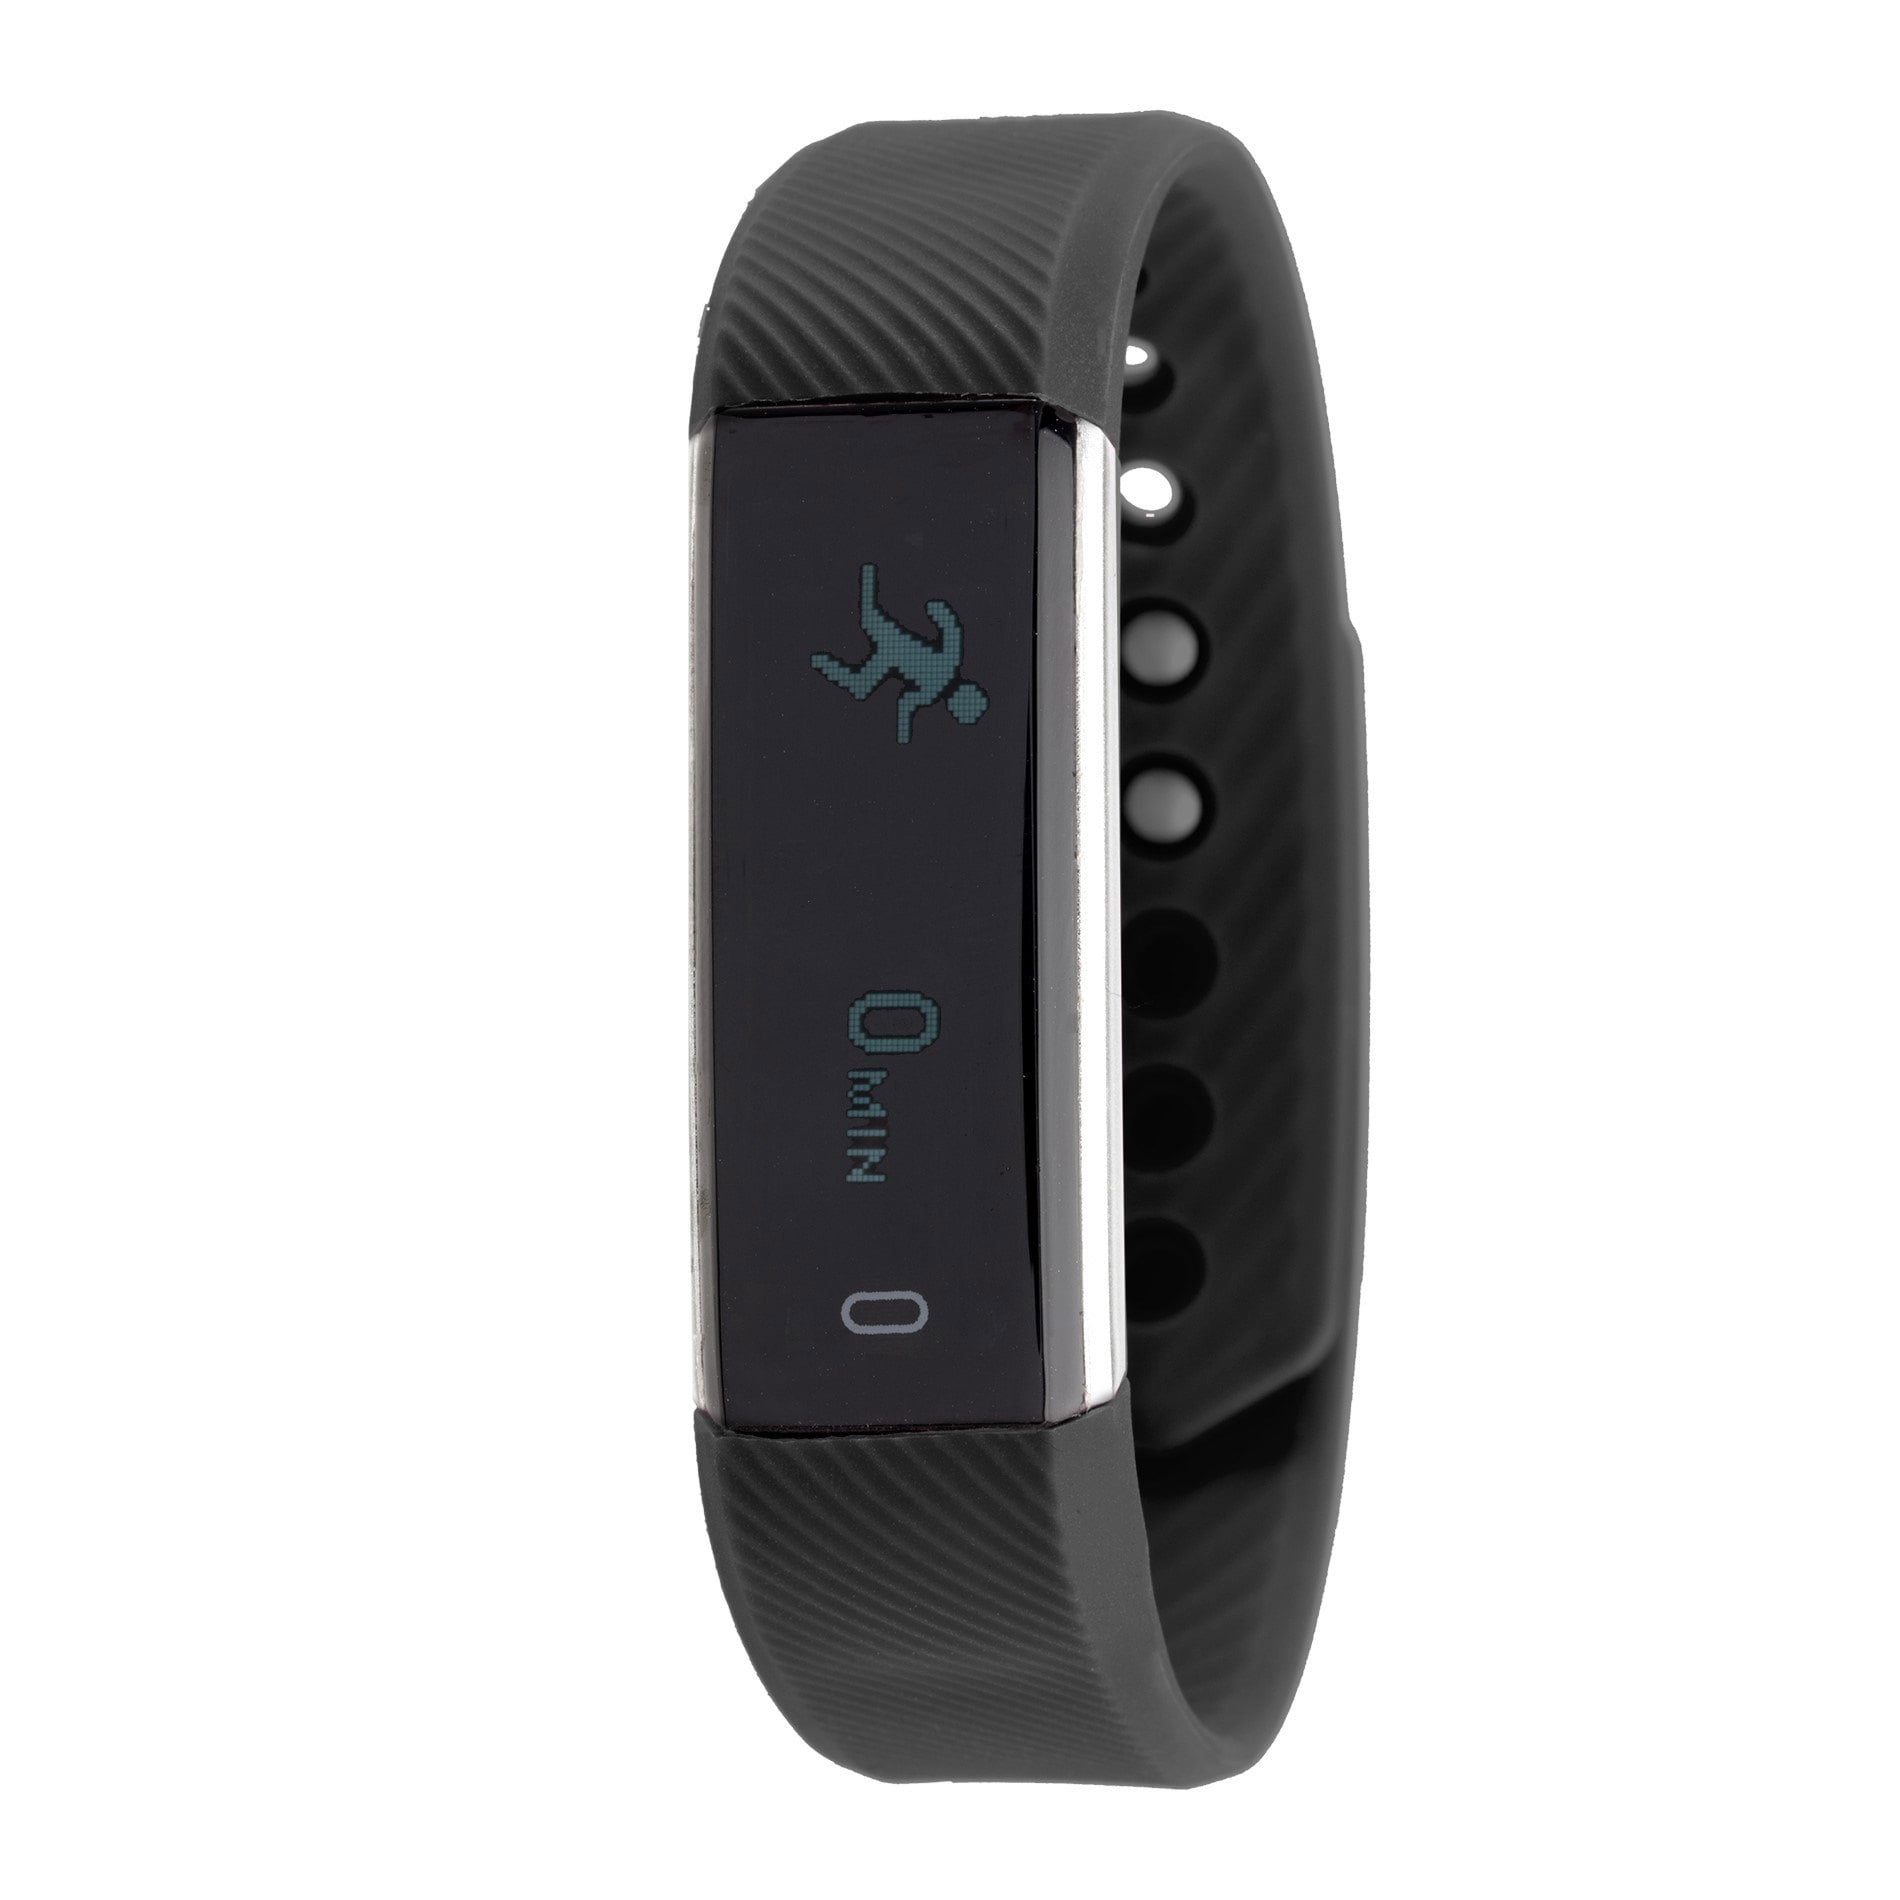 iFit Vue Activity Tracker Rubber Sport Wrist Band w/Metal Buckle Small/Medium 